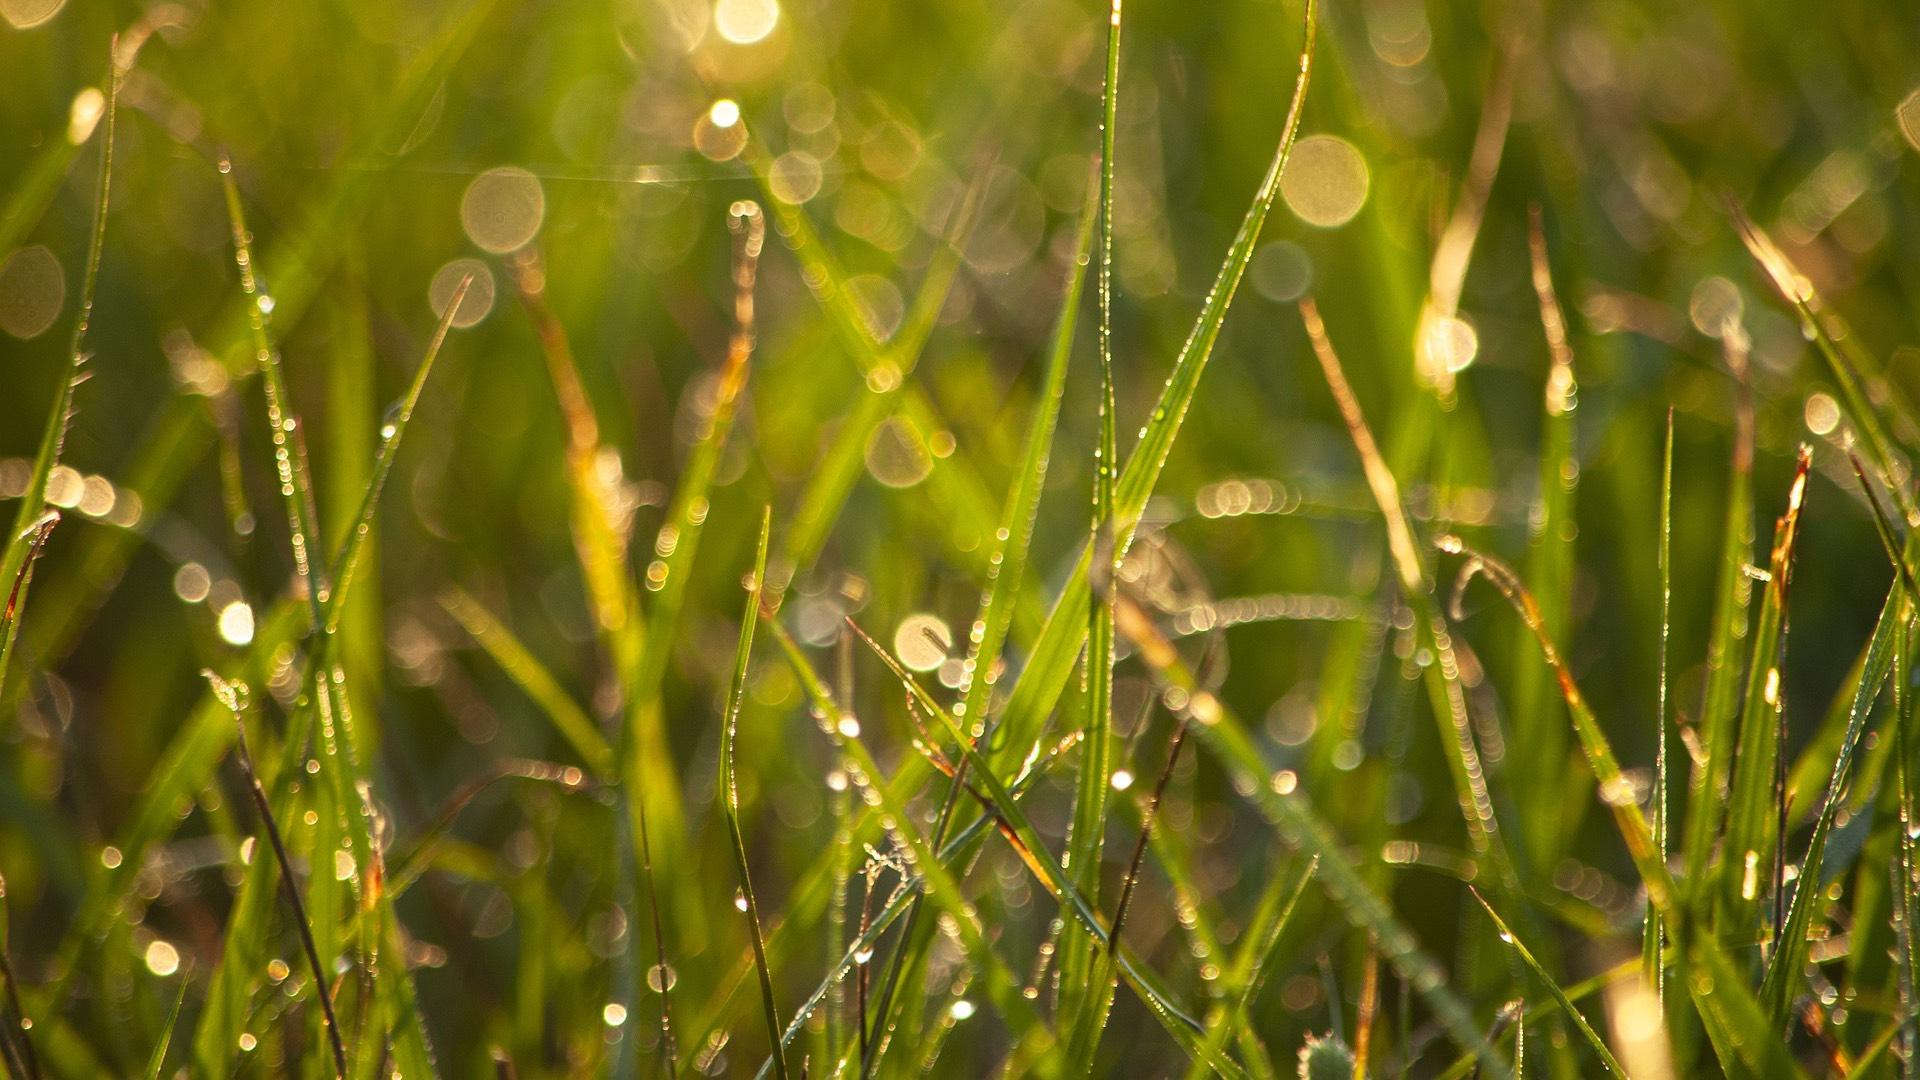 Grass should be kept at least three inches high, experts said. (Suzanne D. Williams / Pixabay)